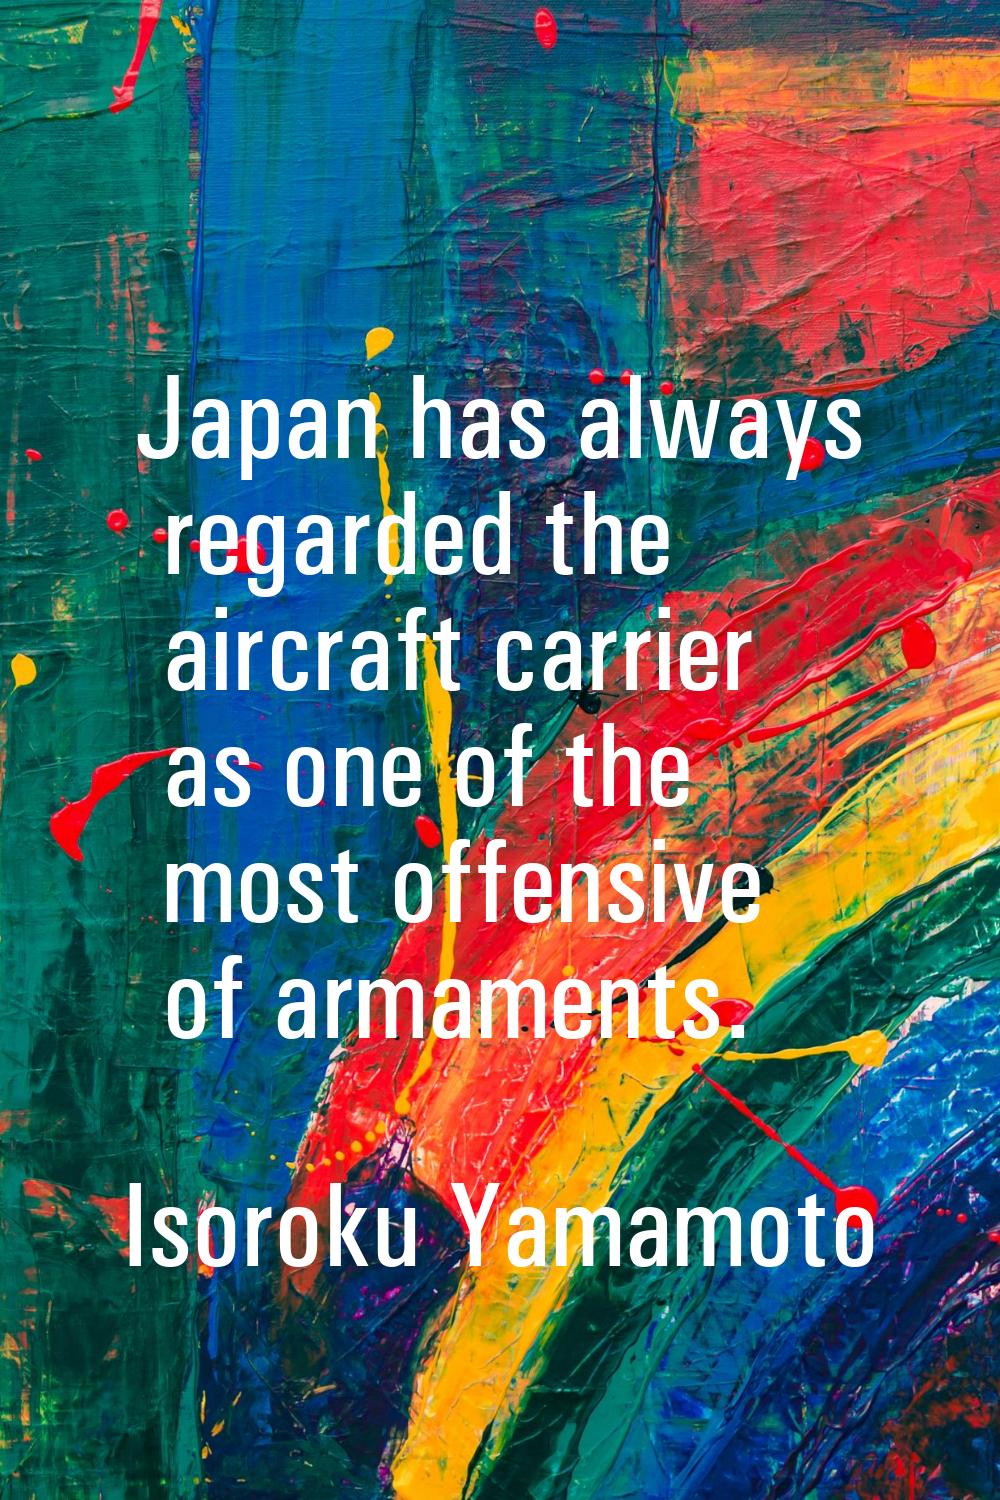 Japan has always regarded the aircraft carrier as one of the most offensive of armaments.